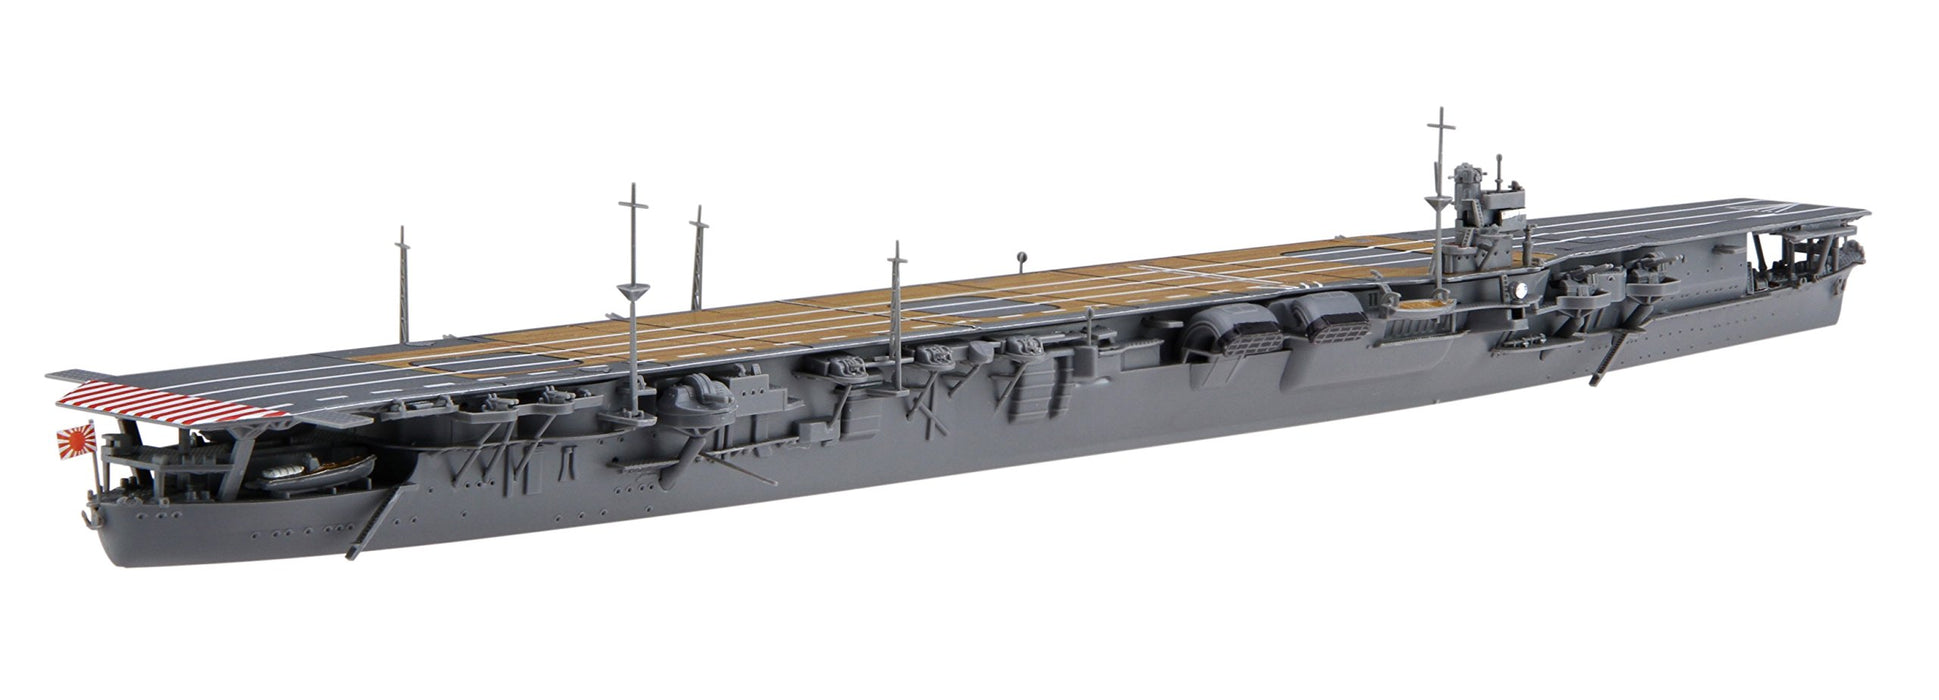 Fujimi Model 1/700 Special Easy Series No.12 Japanese Navy Aircraft Carrier Soryu